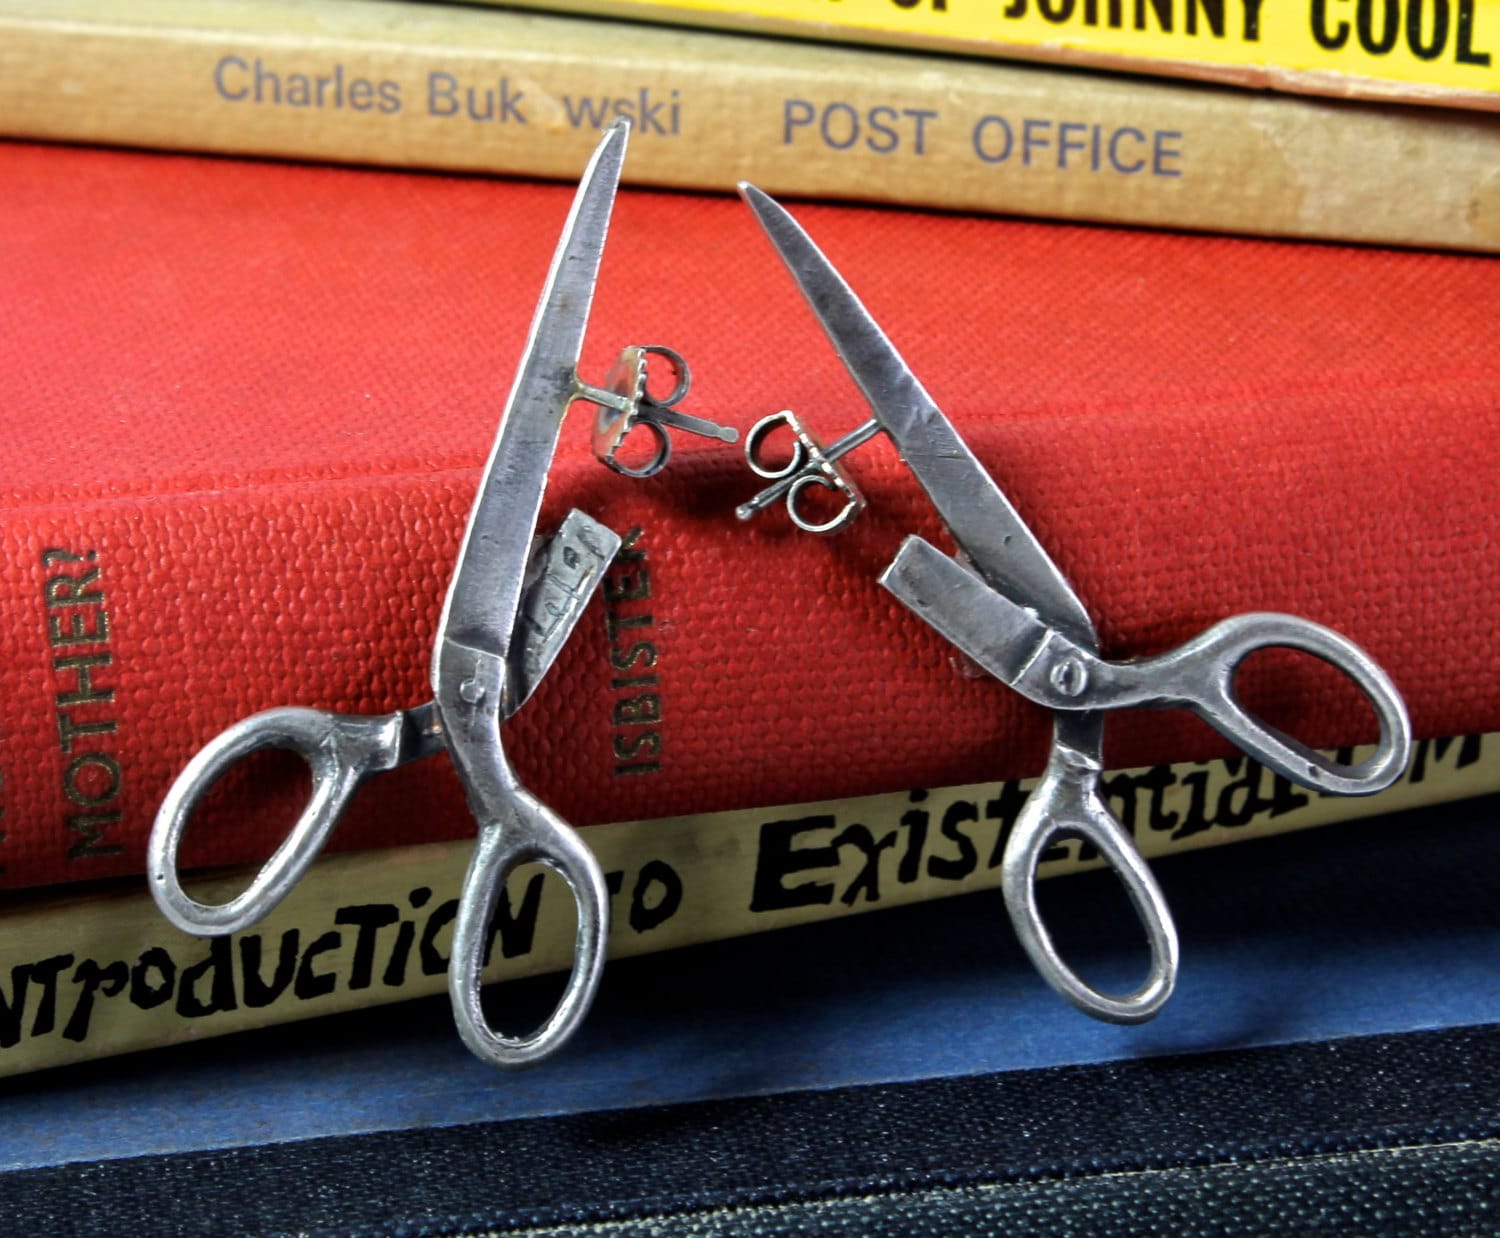  Funny Silver Cute Scissors Studs Earrings Gifts for Men Teens  Women - Hypoallergenic Tiny Silver Cute Scissors Fashion Jewelry: Clothing,  Shoes & Jewelry